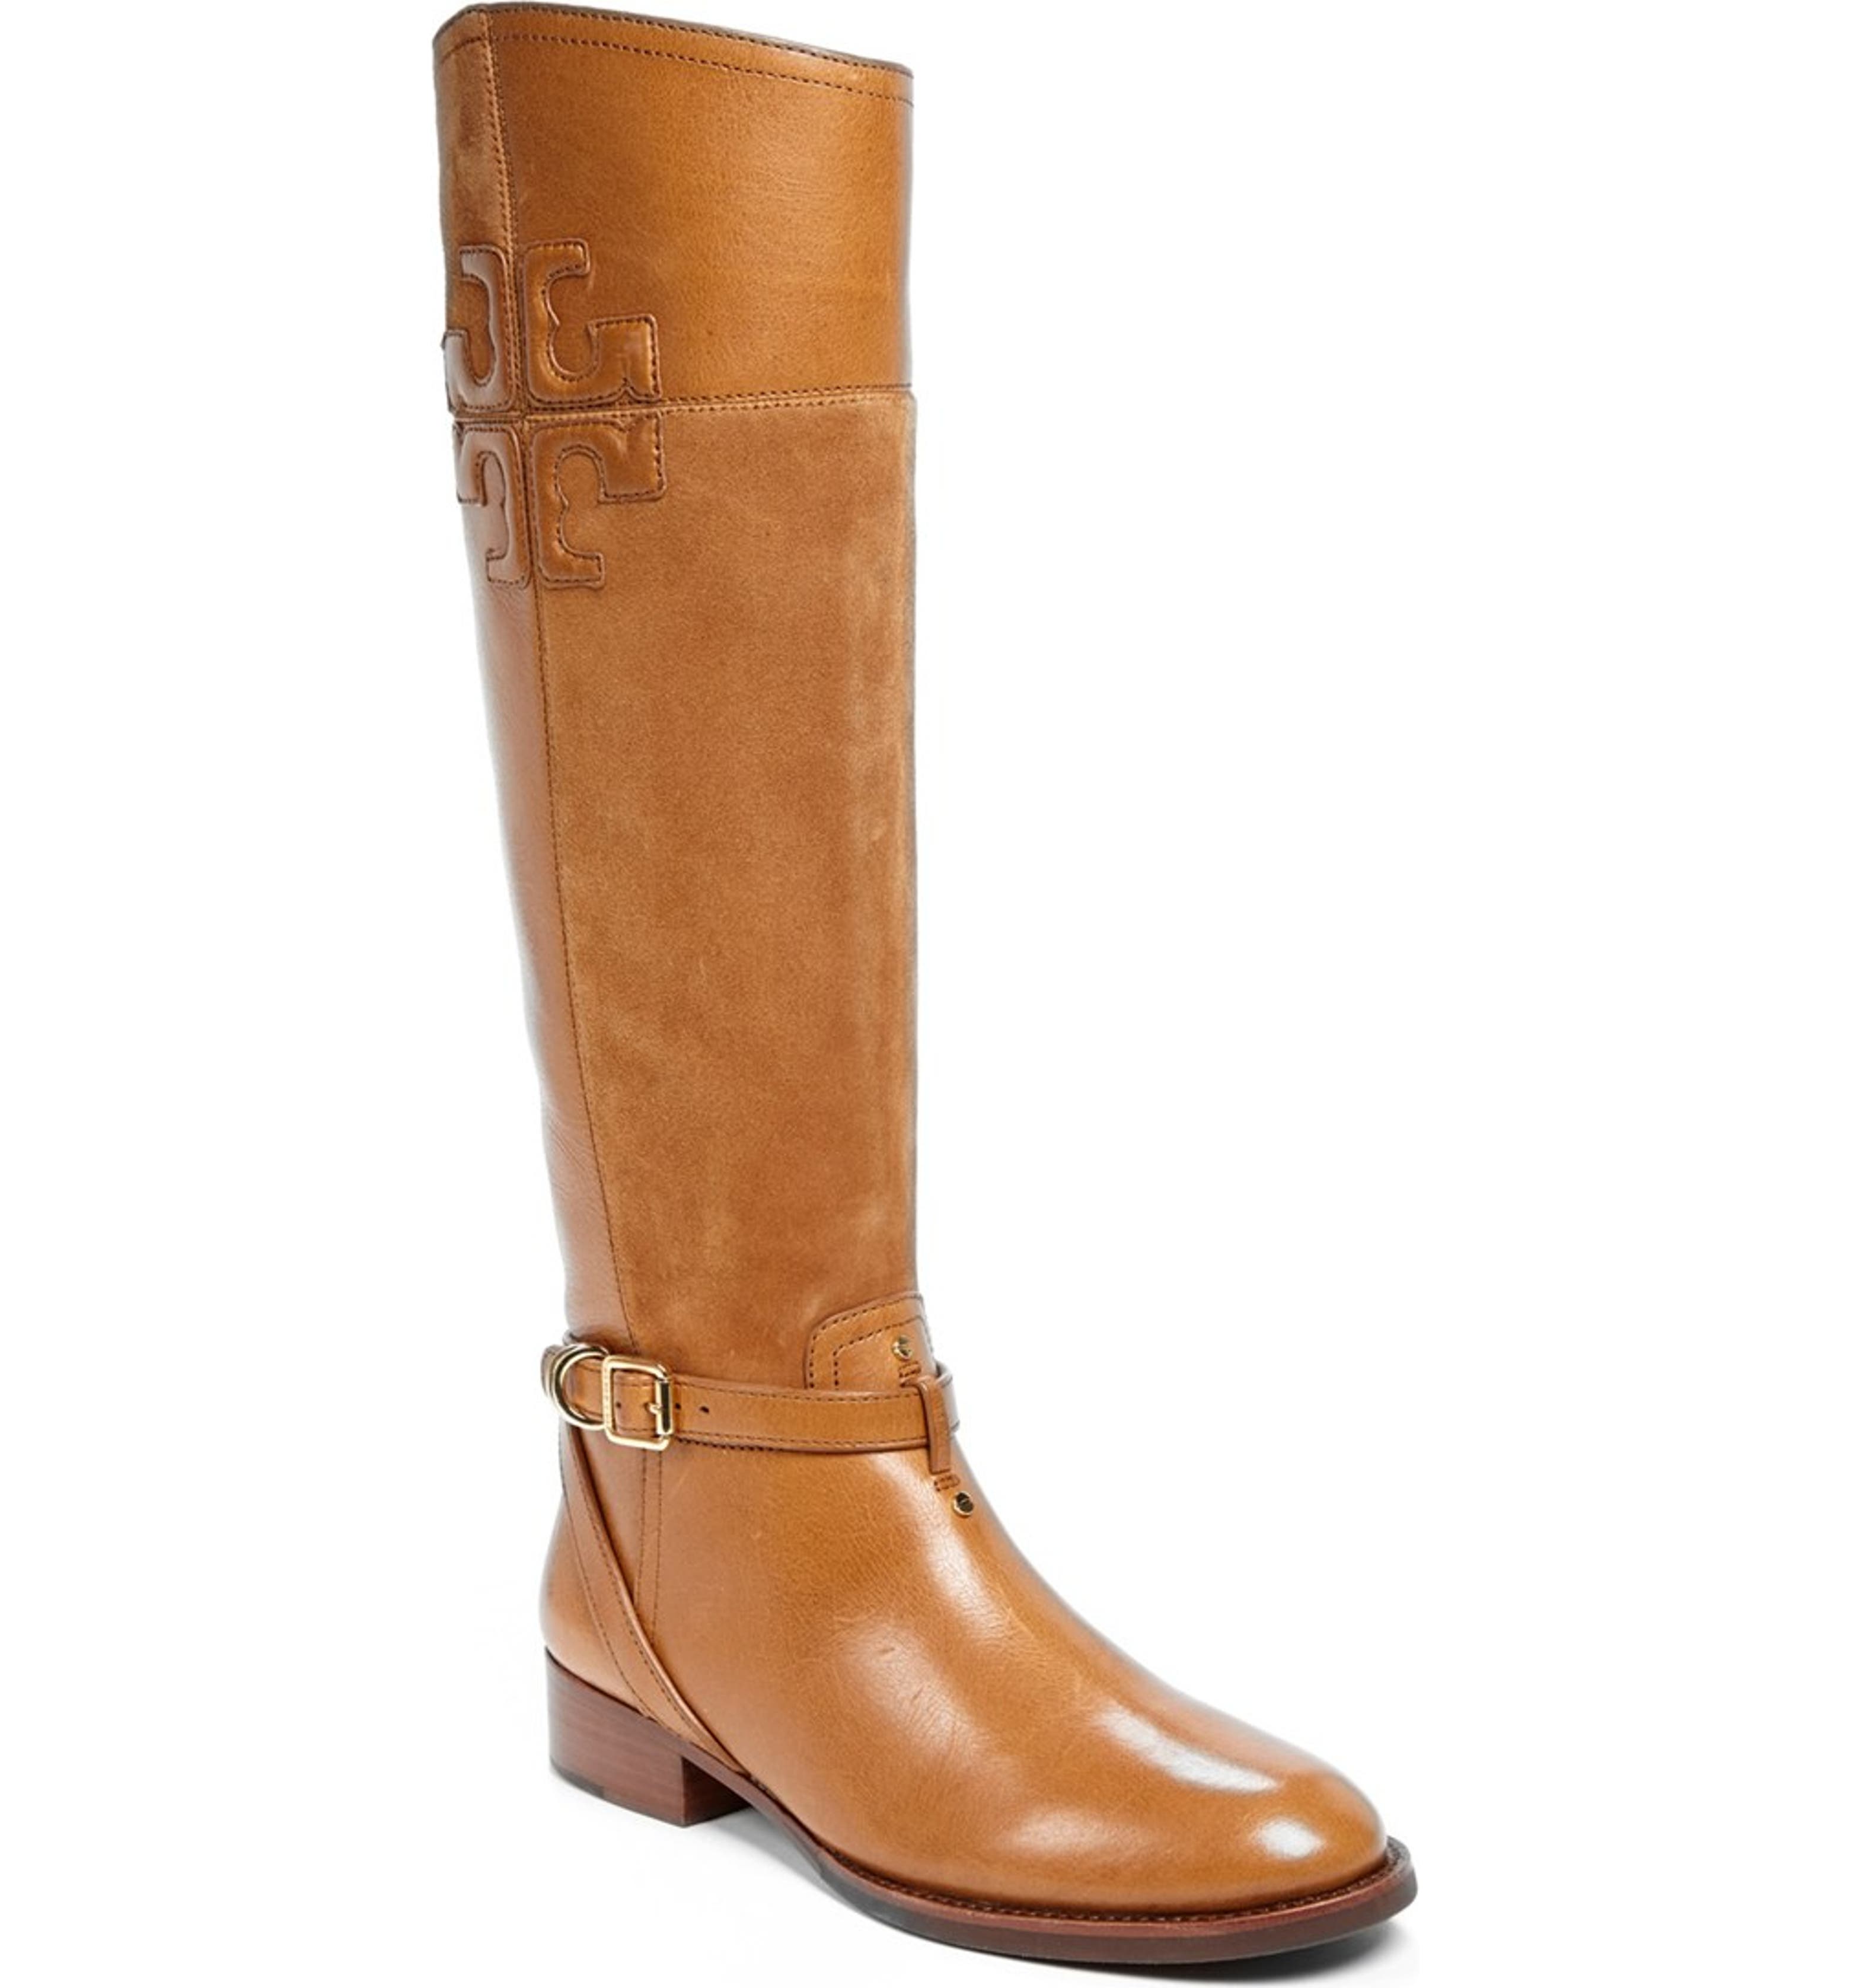 Tory Burch 'Lizzie' Leather & Suede Riding Boot | Nordstrom